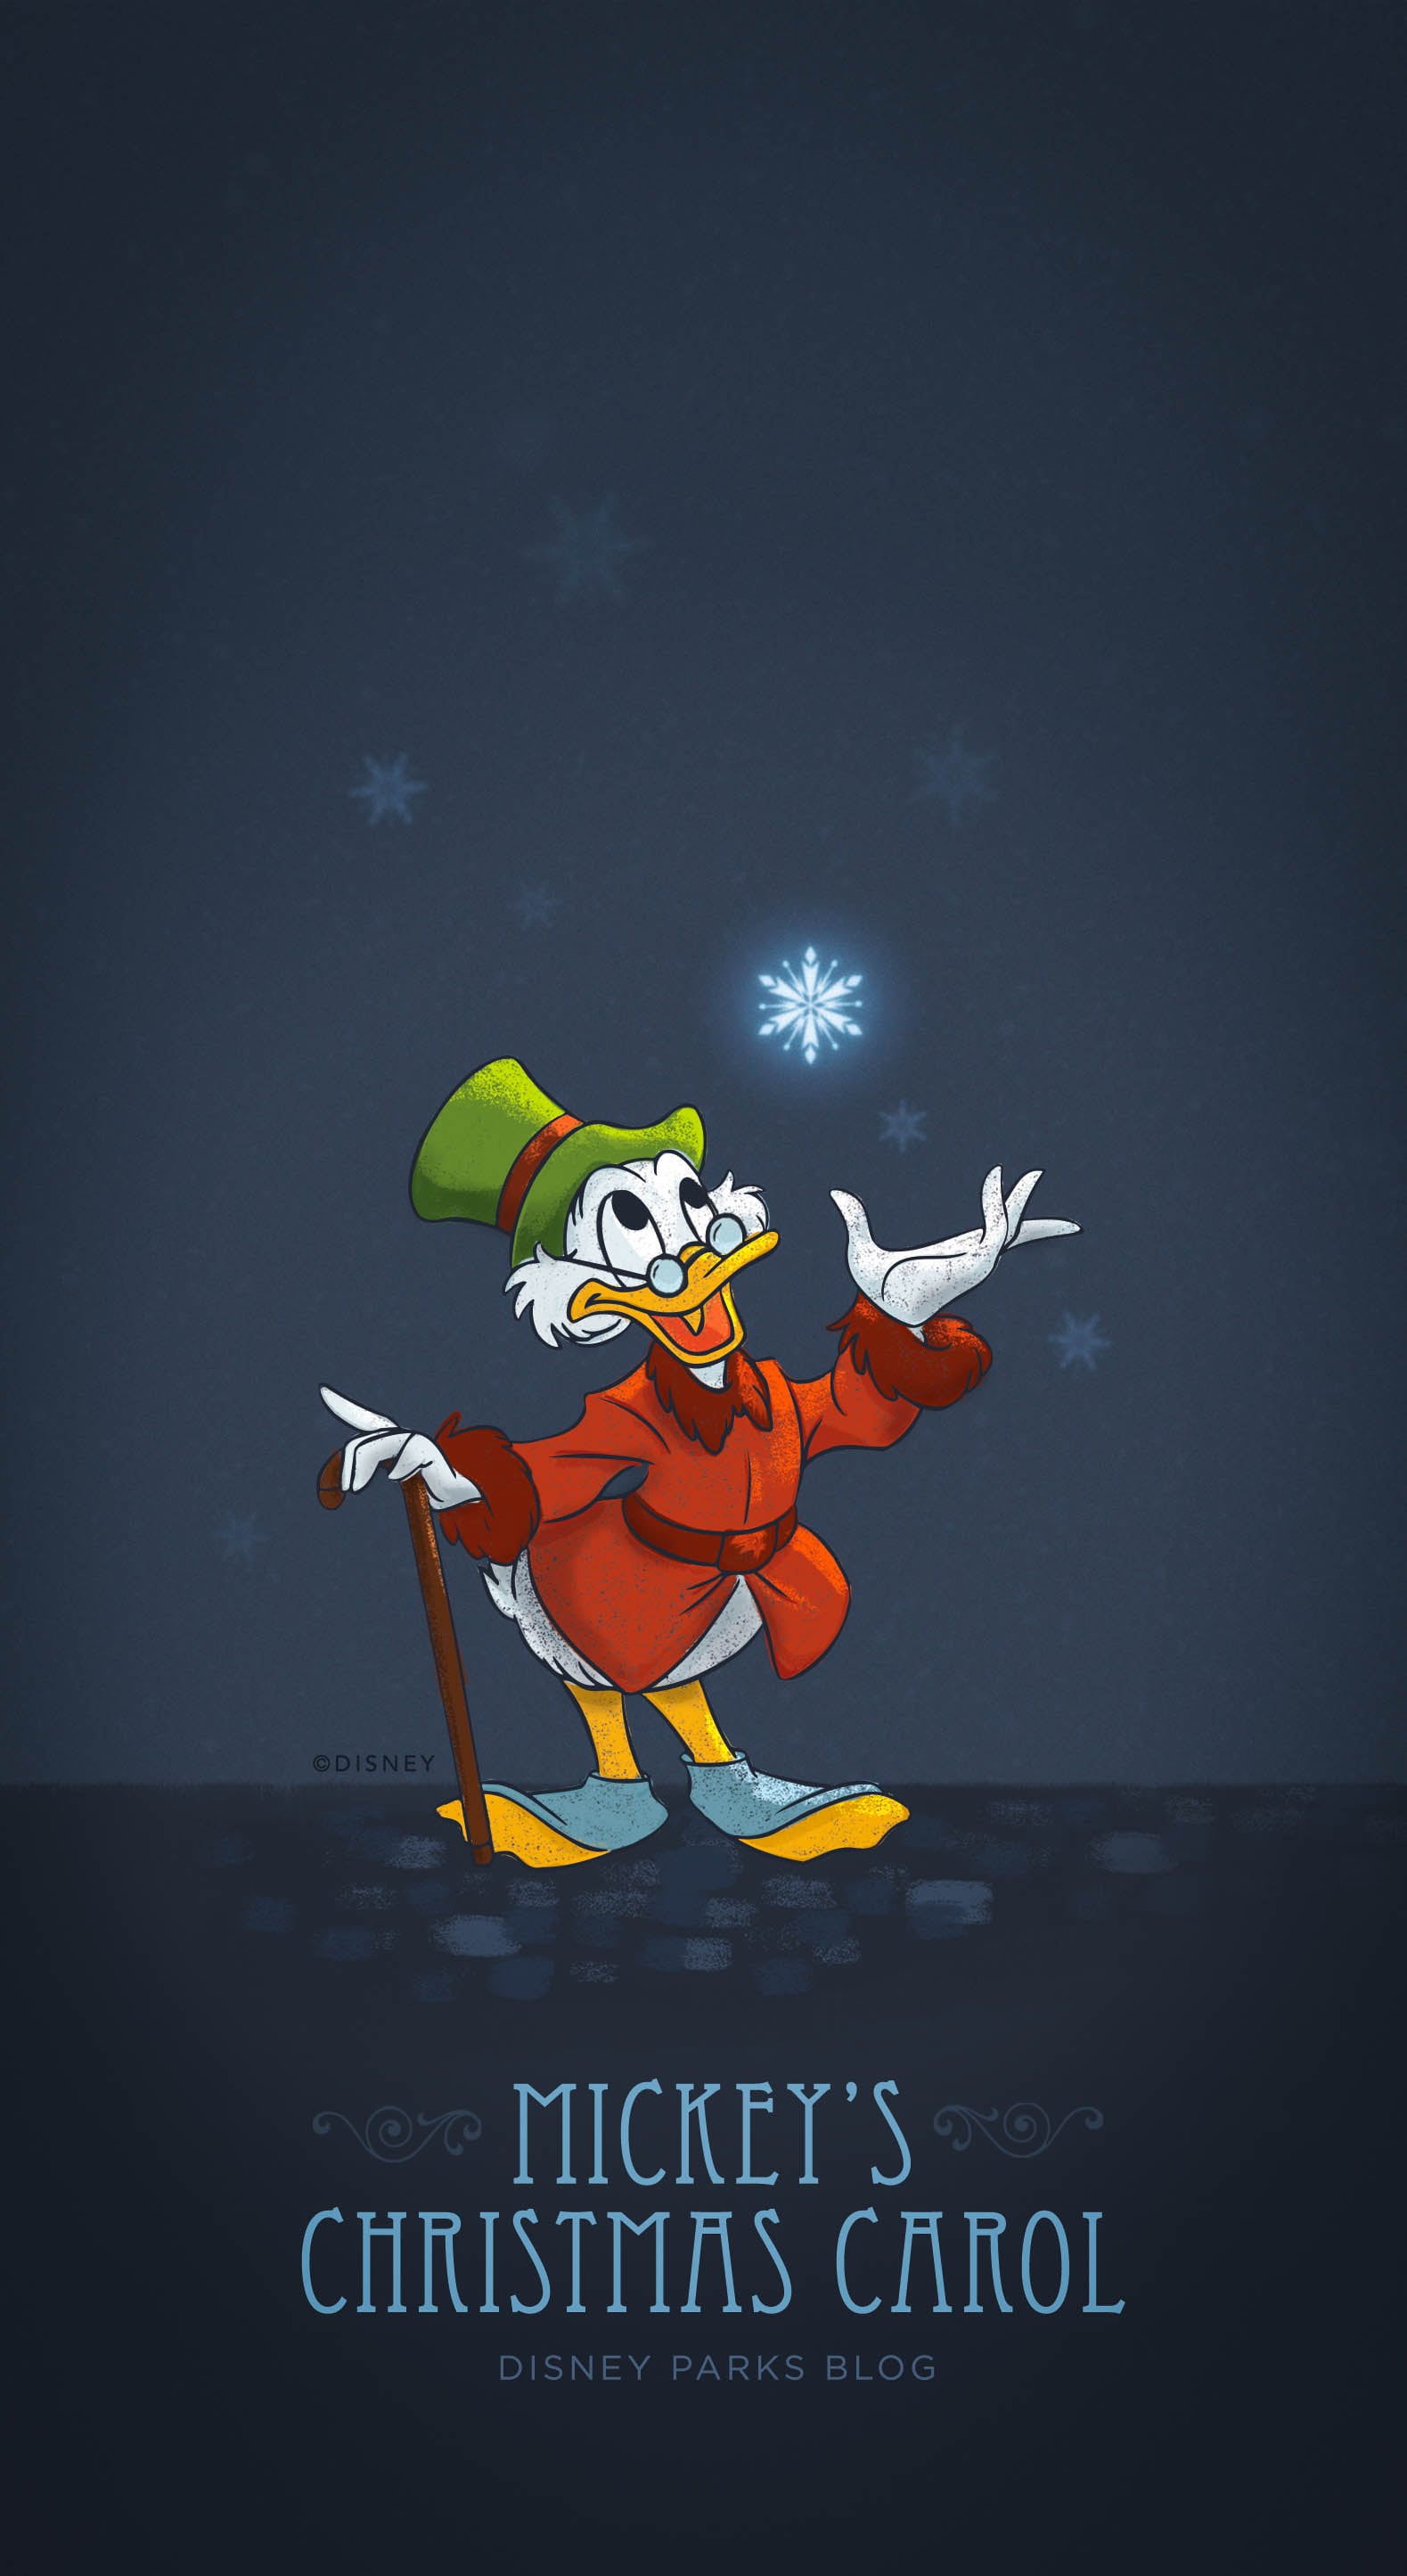 ‘Mickey’s Christmas Carol’ Inspired 2018 Holiday Wallpaper – iPhone/Android | Disney Parks Blog